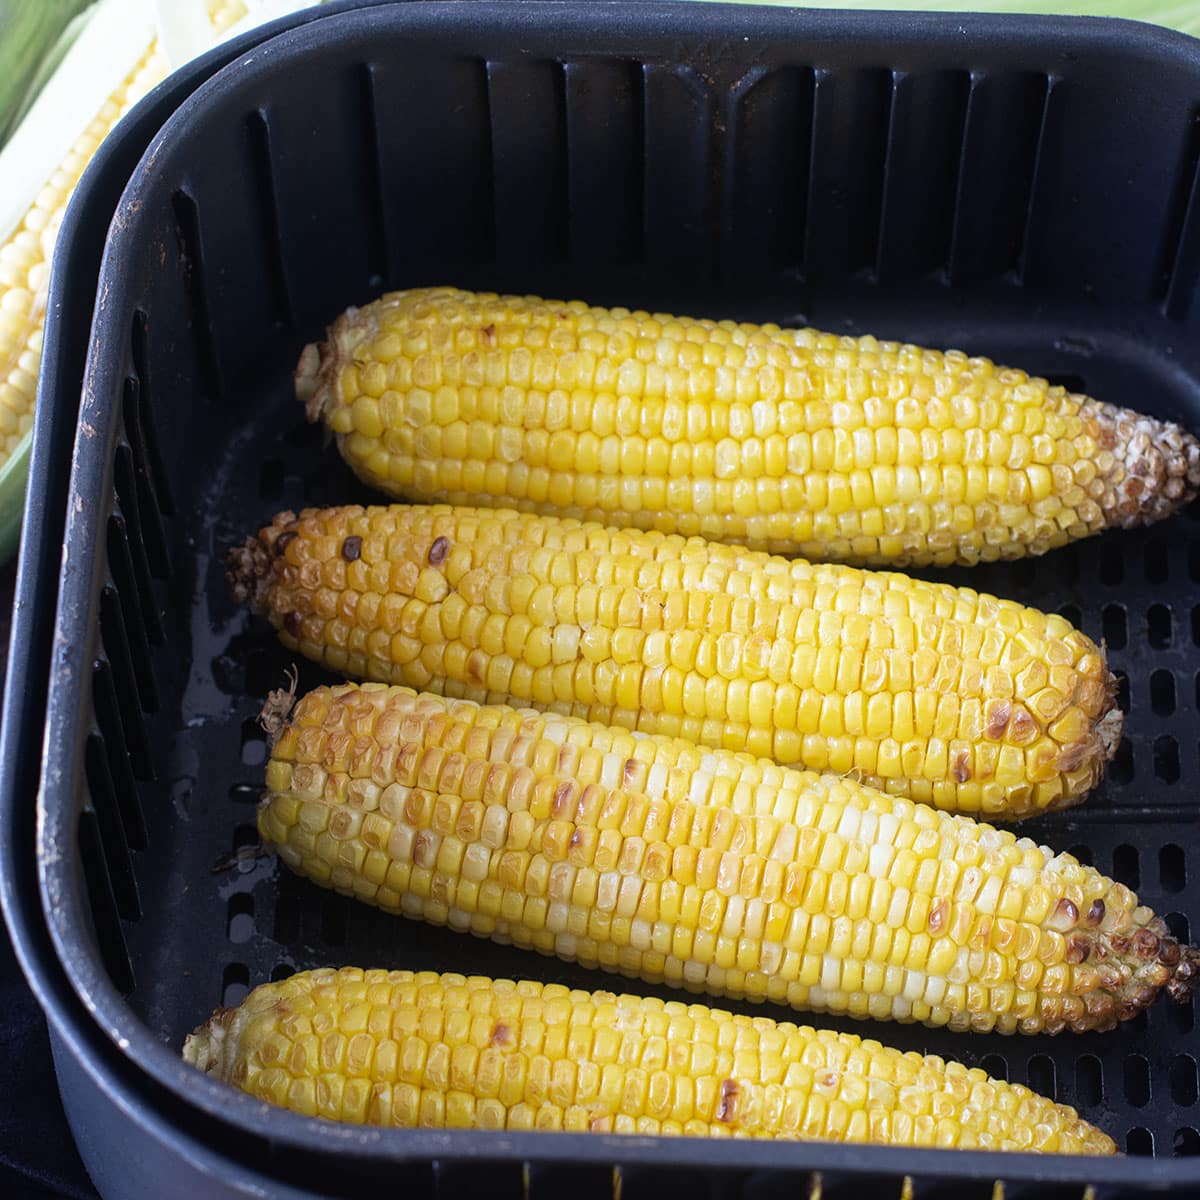 Four ears cooked corn in an air fryer basket.